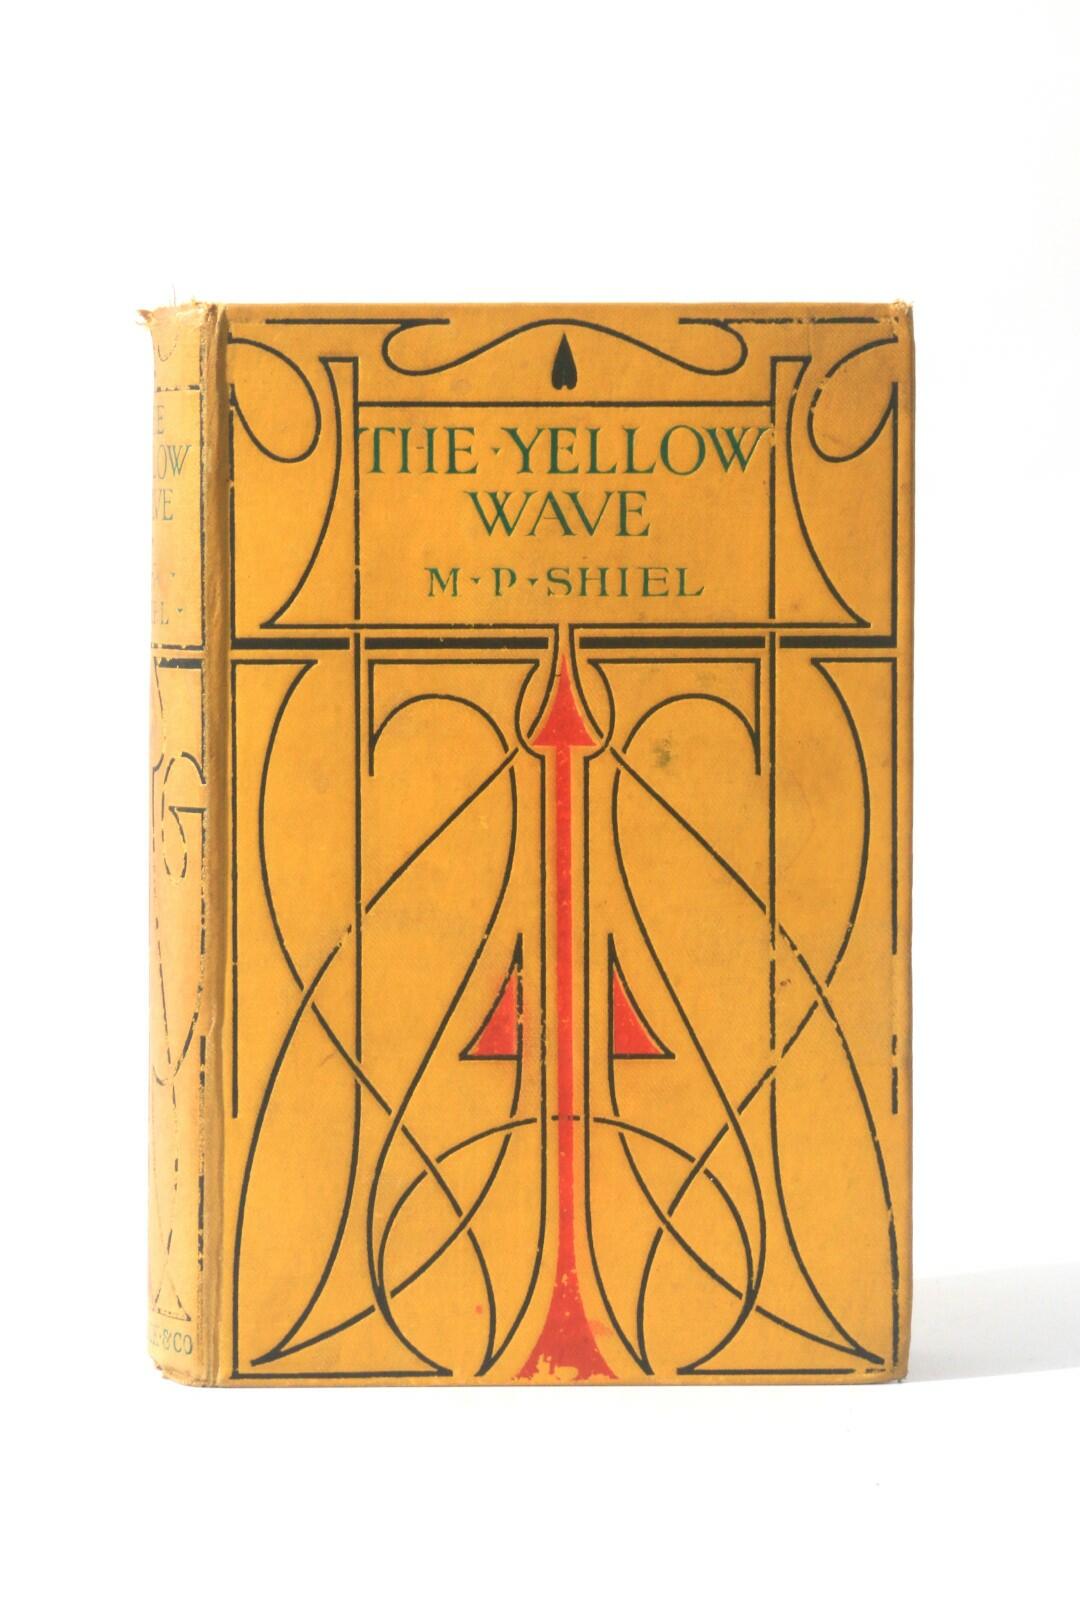 M.P. Shiel - The Yellow Wave - Ward Lock & Co., 1905, First Edition.